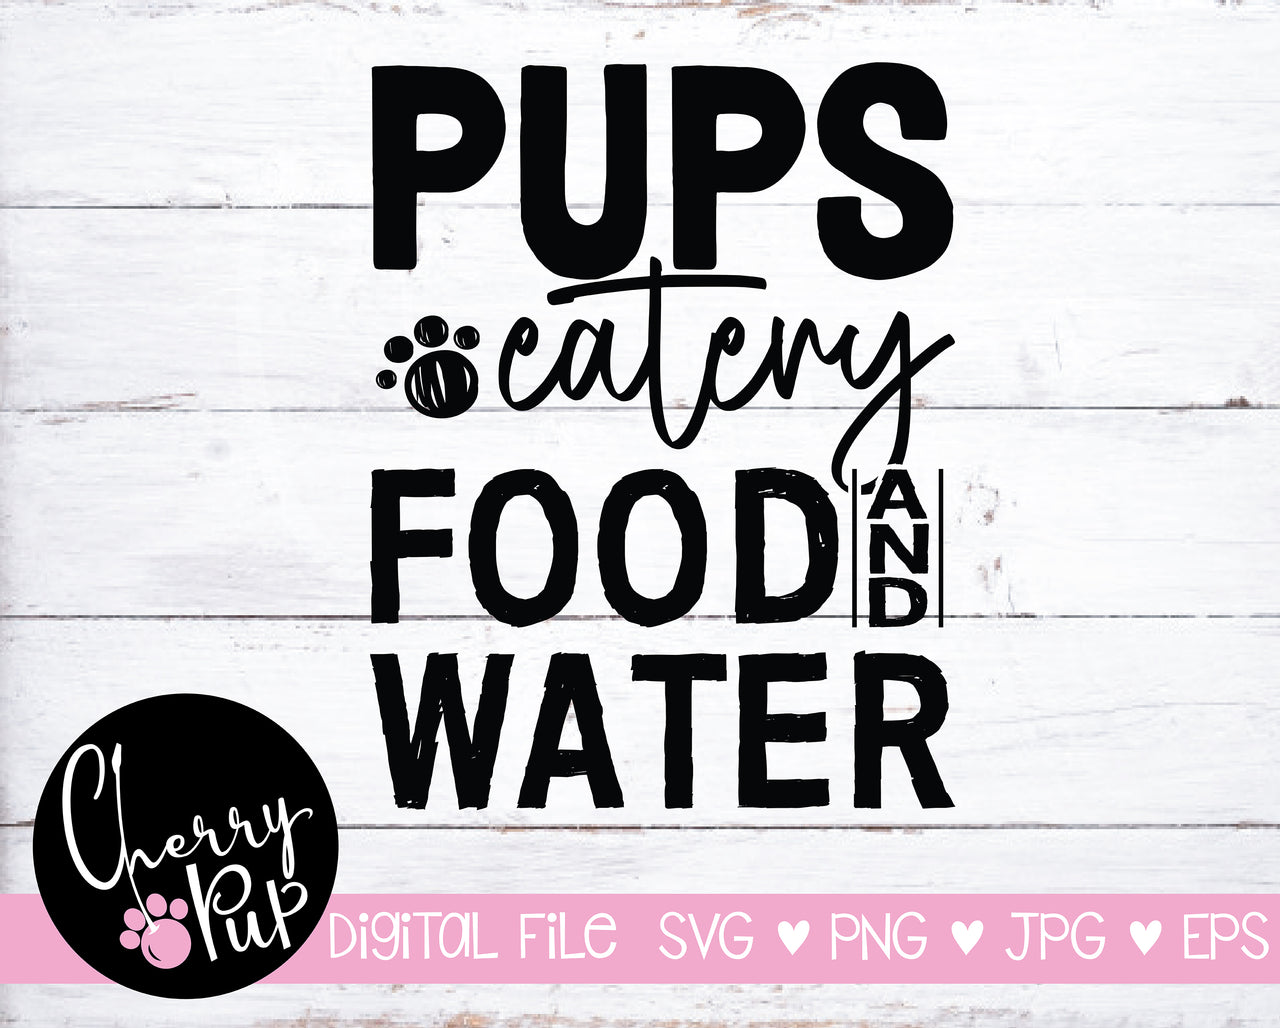 Pups Eatery Food & Water